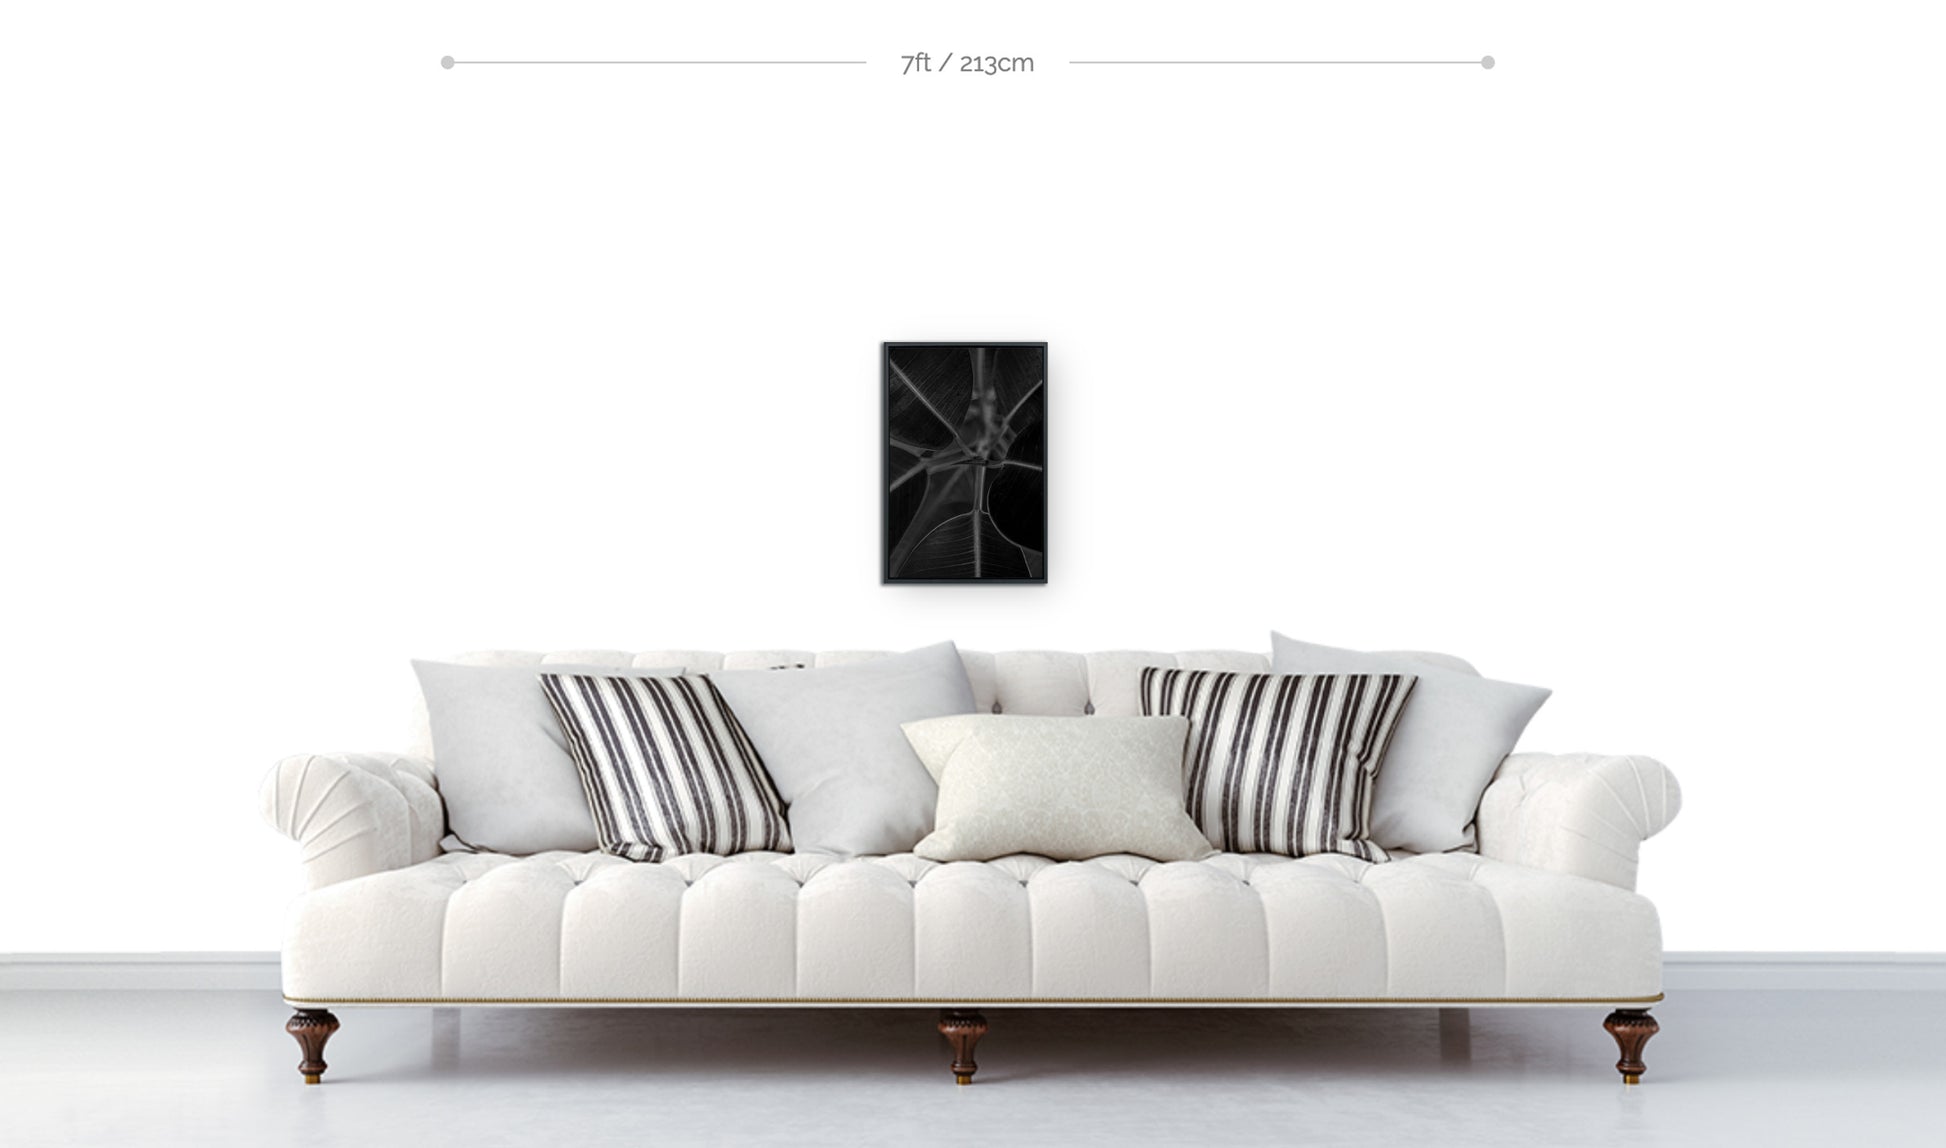 Botanical wall hanging framed black and white photograph closeup leaves growing from stem displayed above sofa